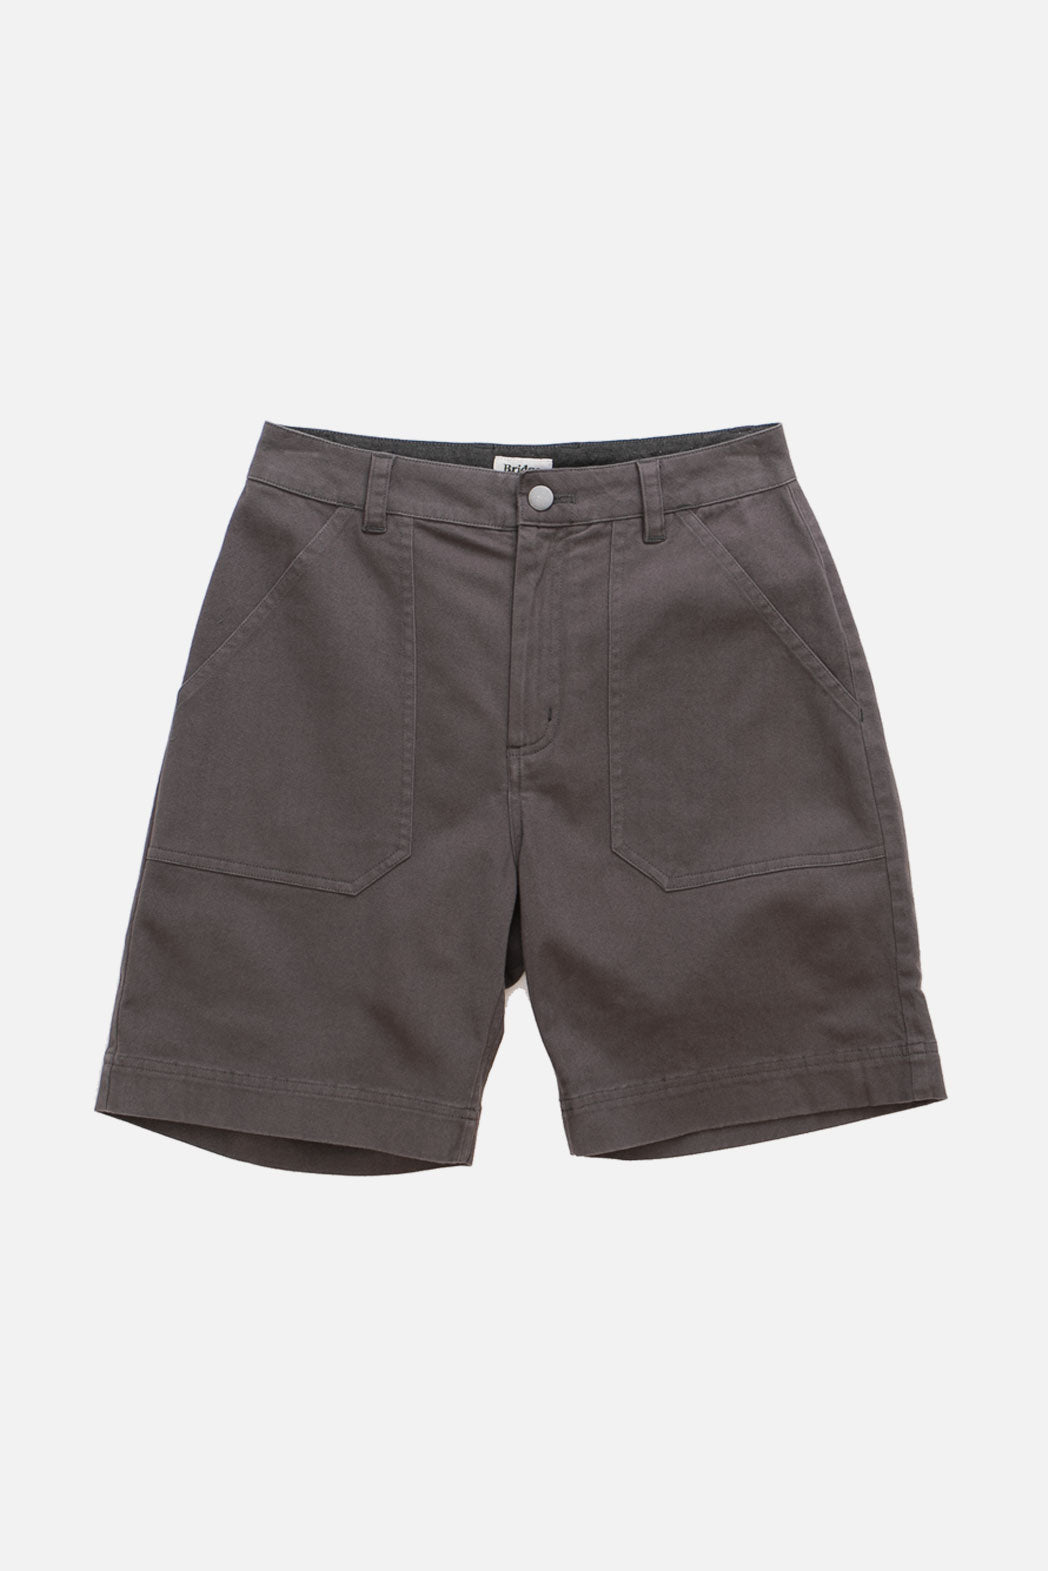 Rylie Short / Charcoal